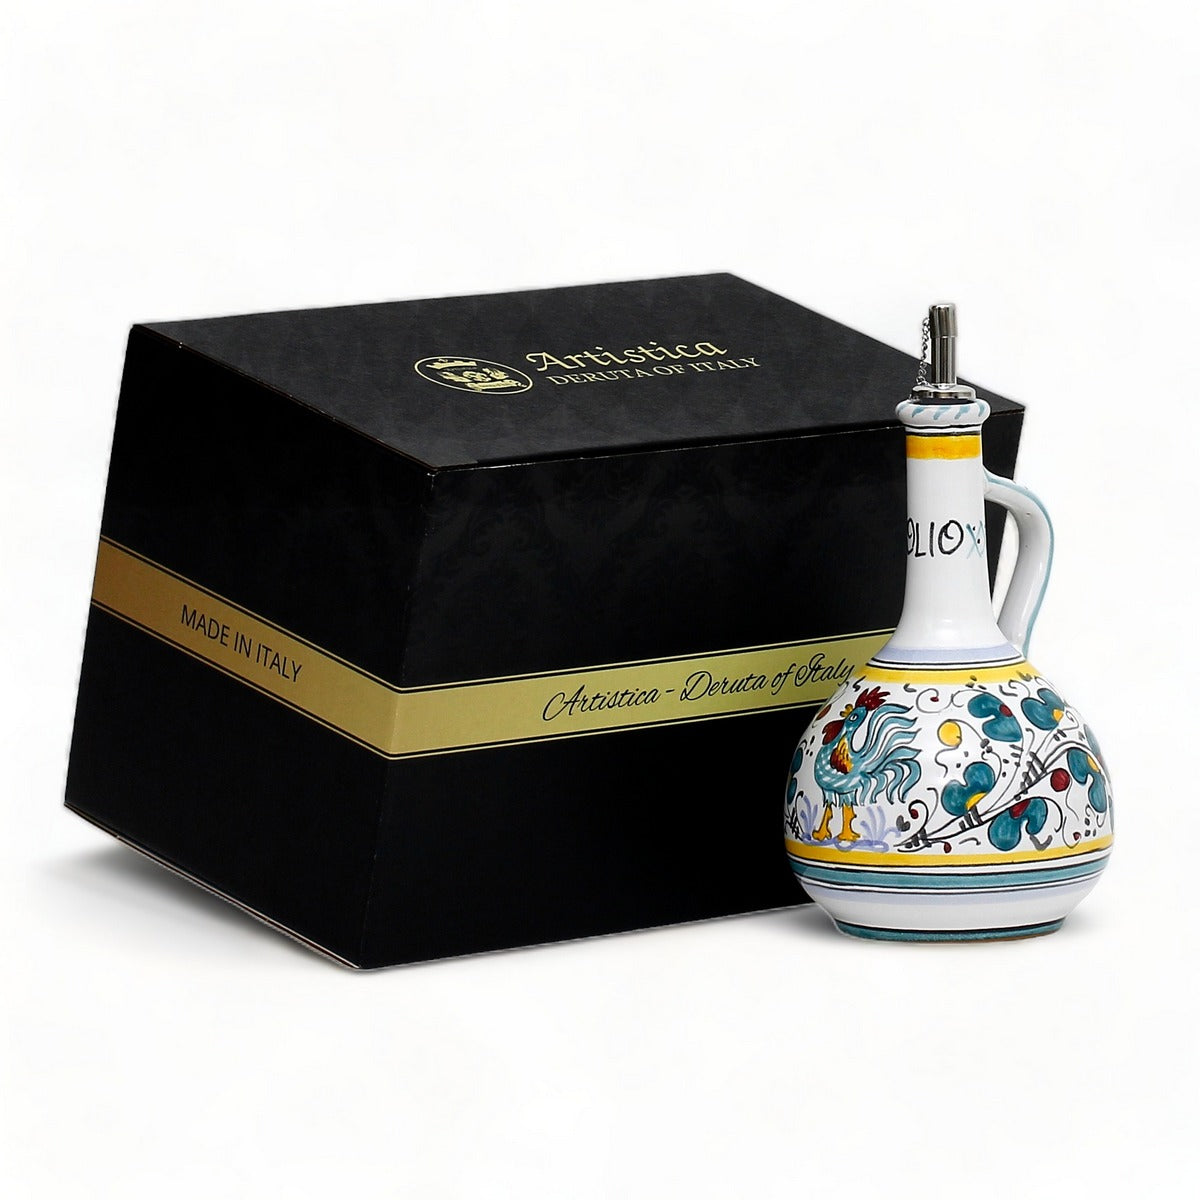 GIFT BOX: With authentic Deruta hand painted ceramic - Olive Oil Dispenser Green Rooster Design